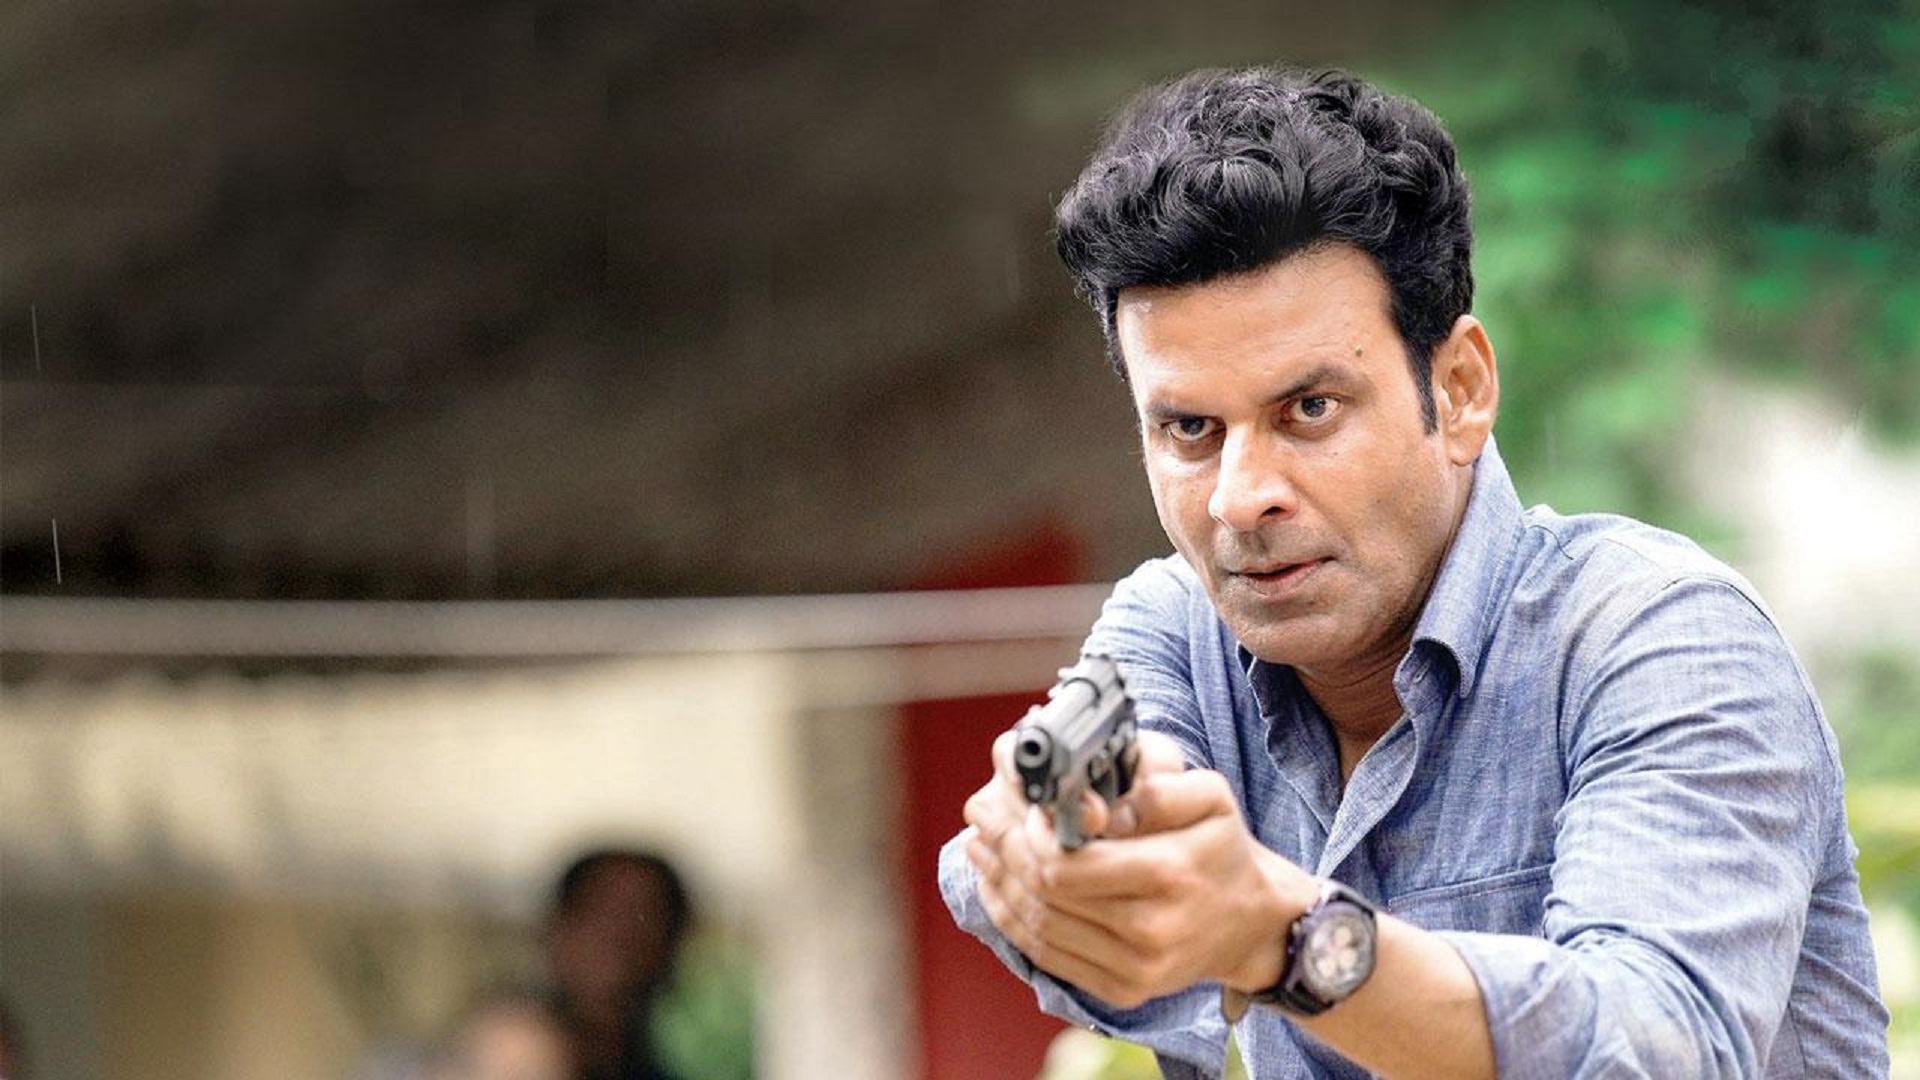 ‘The Family Man’ Ranked Among Top 4 Most Popular Shows In The World, Manoj Bajpayee Responds Humbly To The News